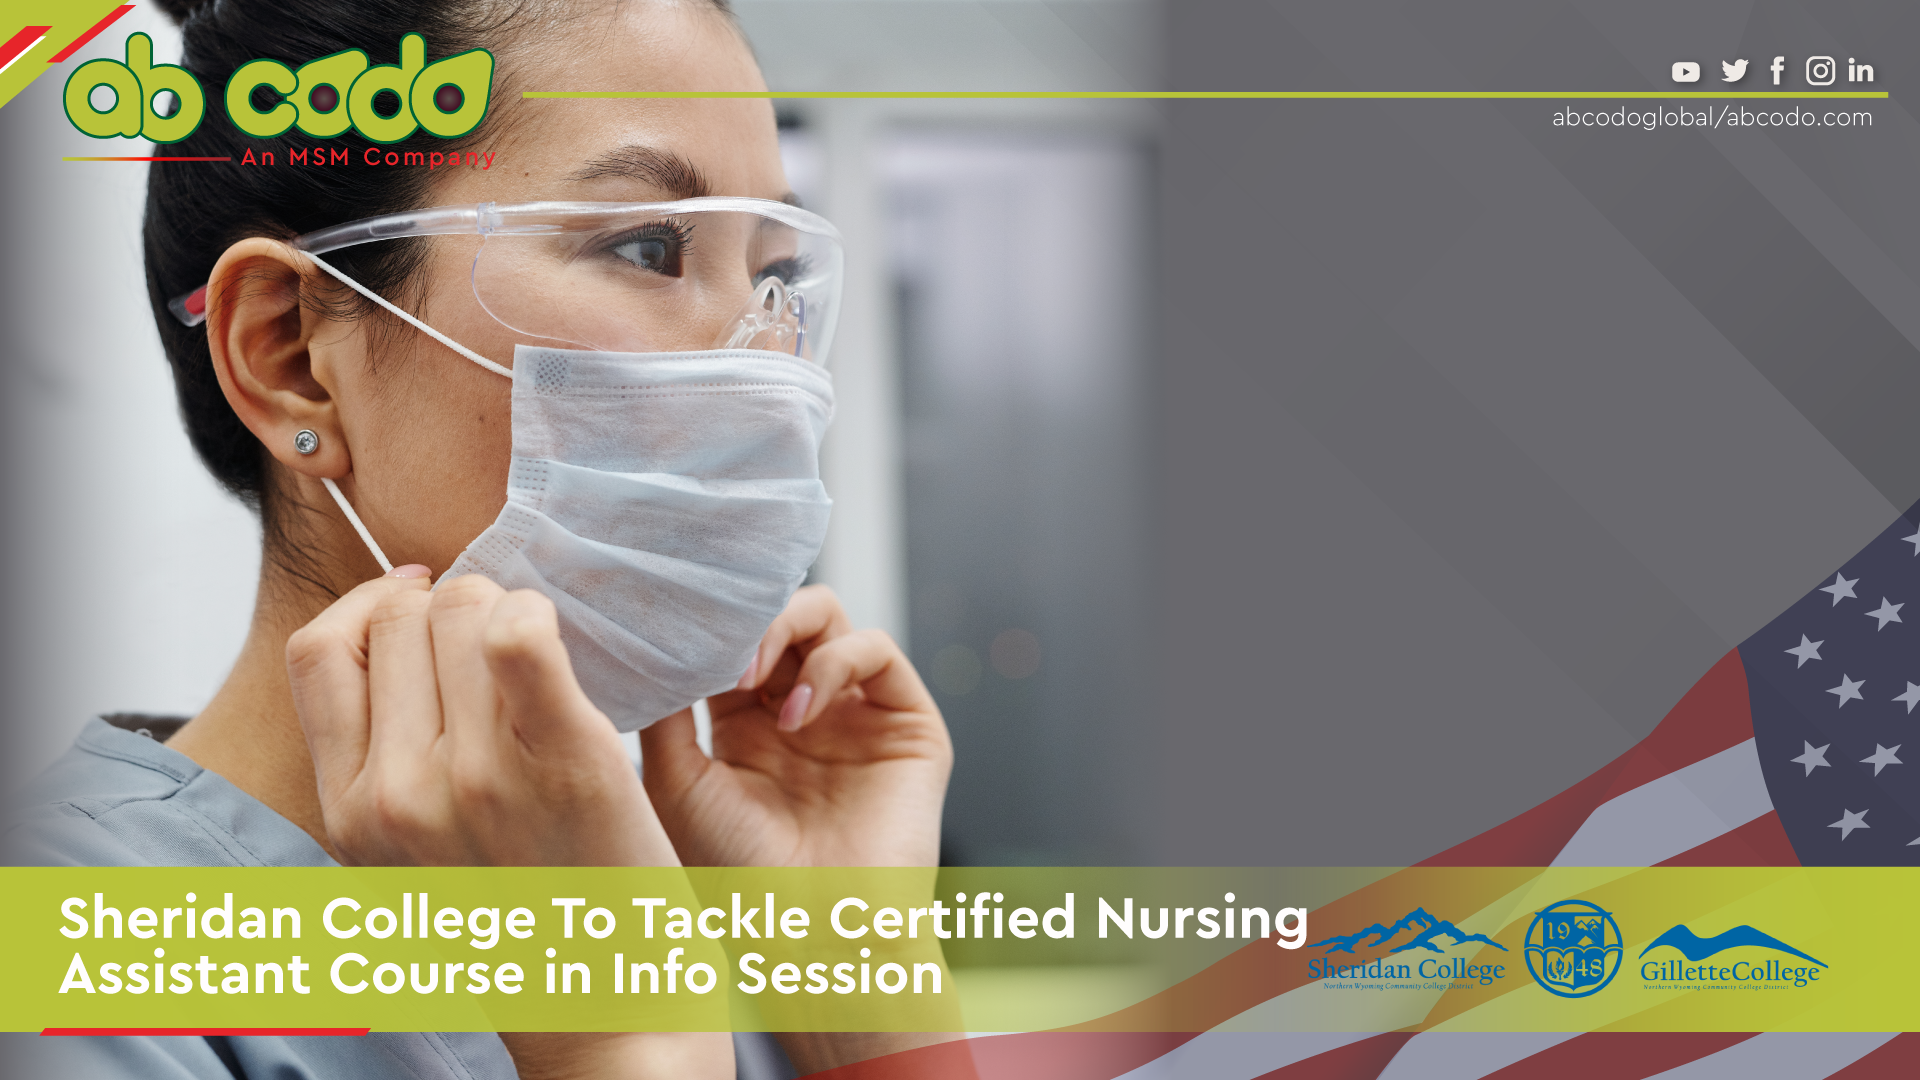 Sheridan College Tackles Certified Nursing Assistant Course